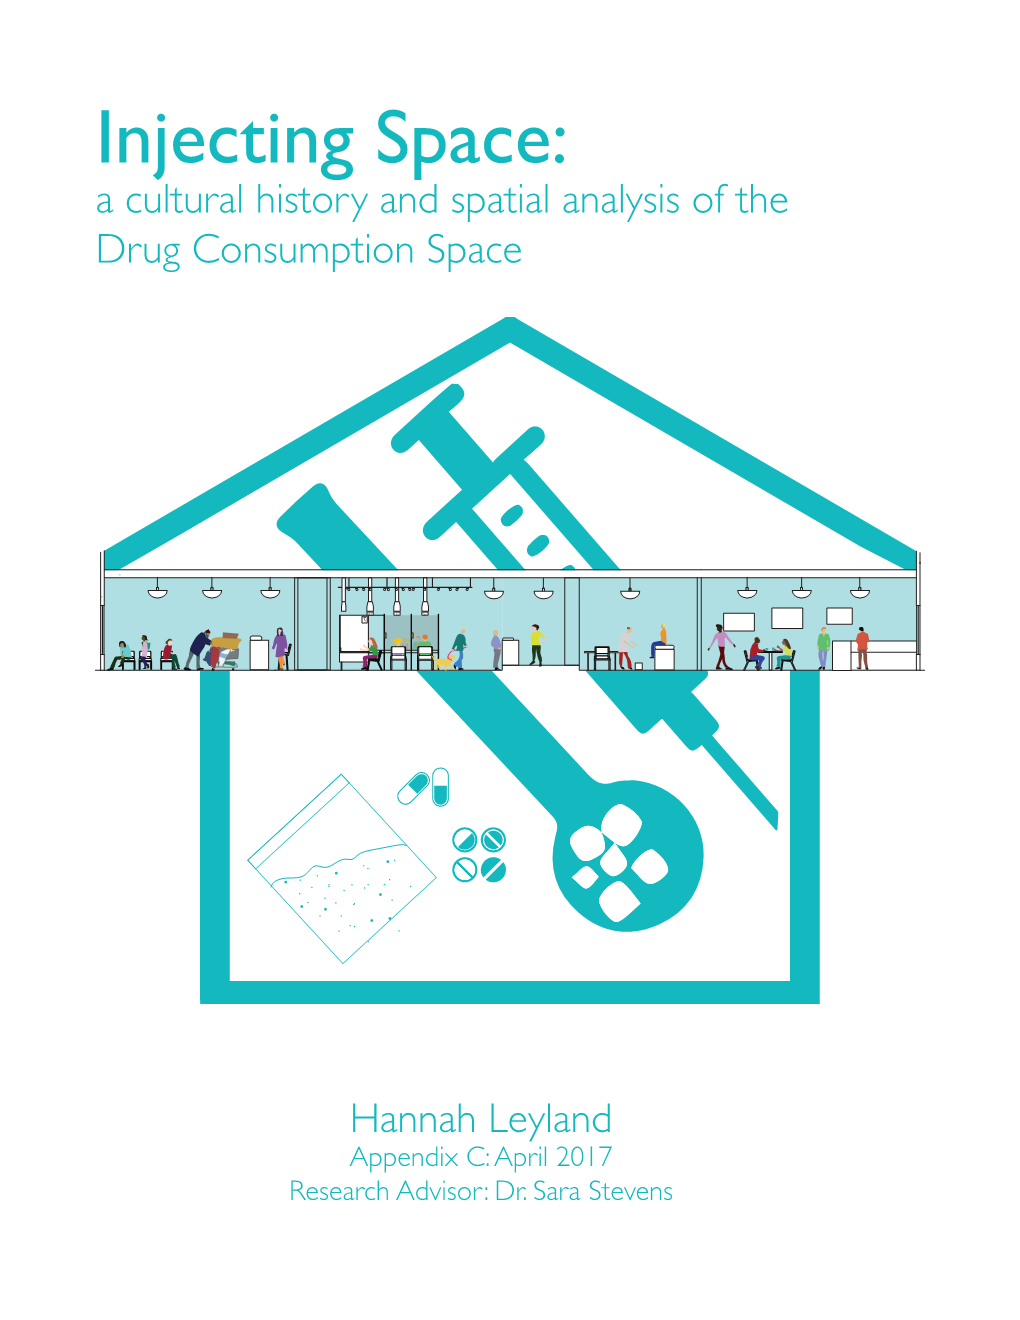 Injecting Space: a Cultural History and Spatial Analysis of the Drug Consumption Space